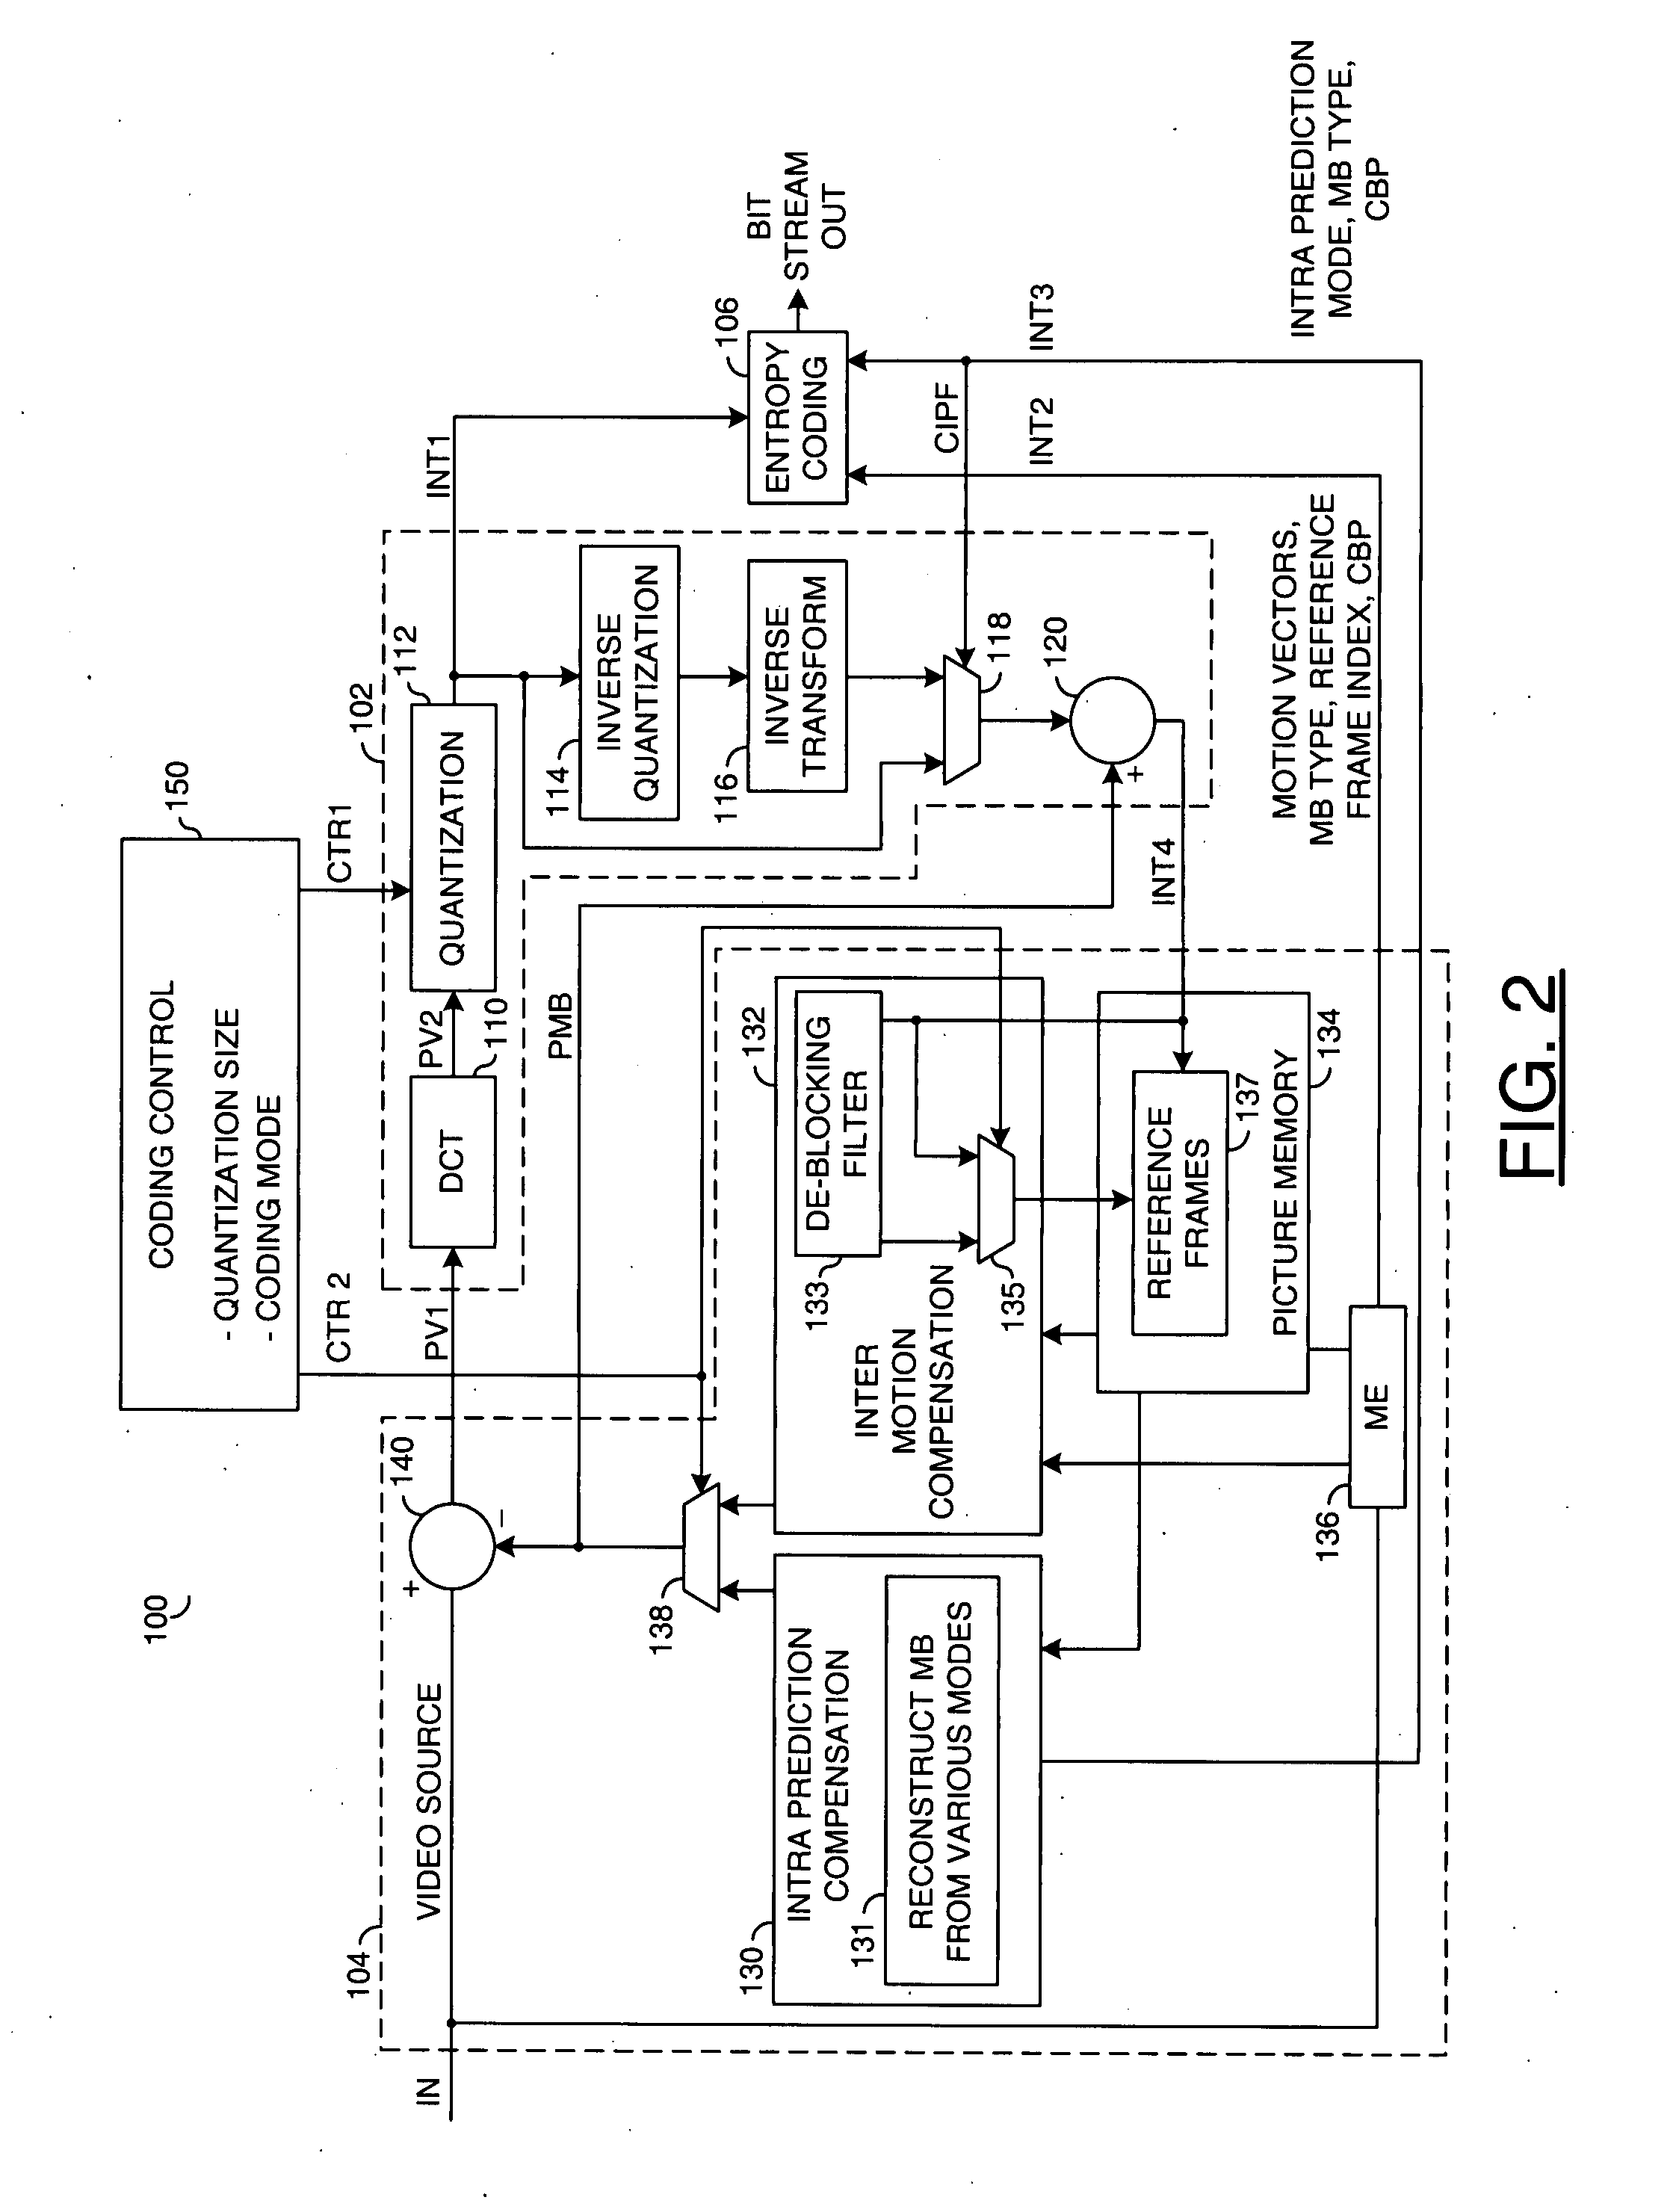 Method and/or apparatus for reducing the complexity of H.264 B-frame encoding using selective reconstruction